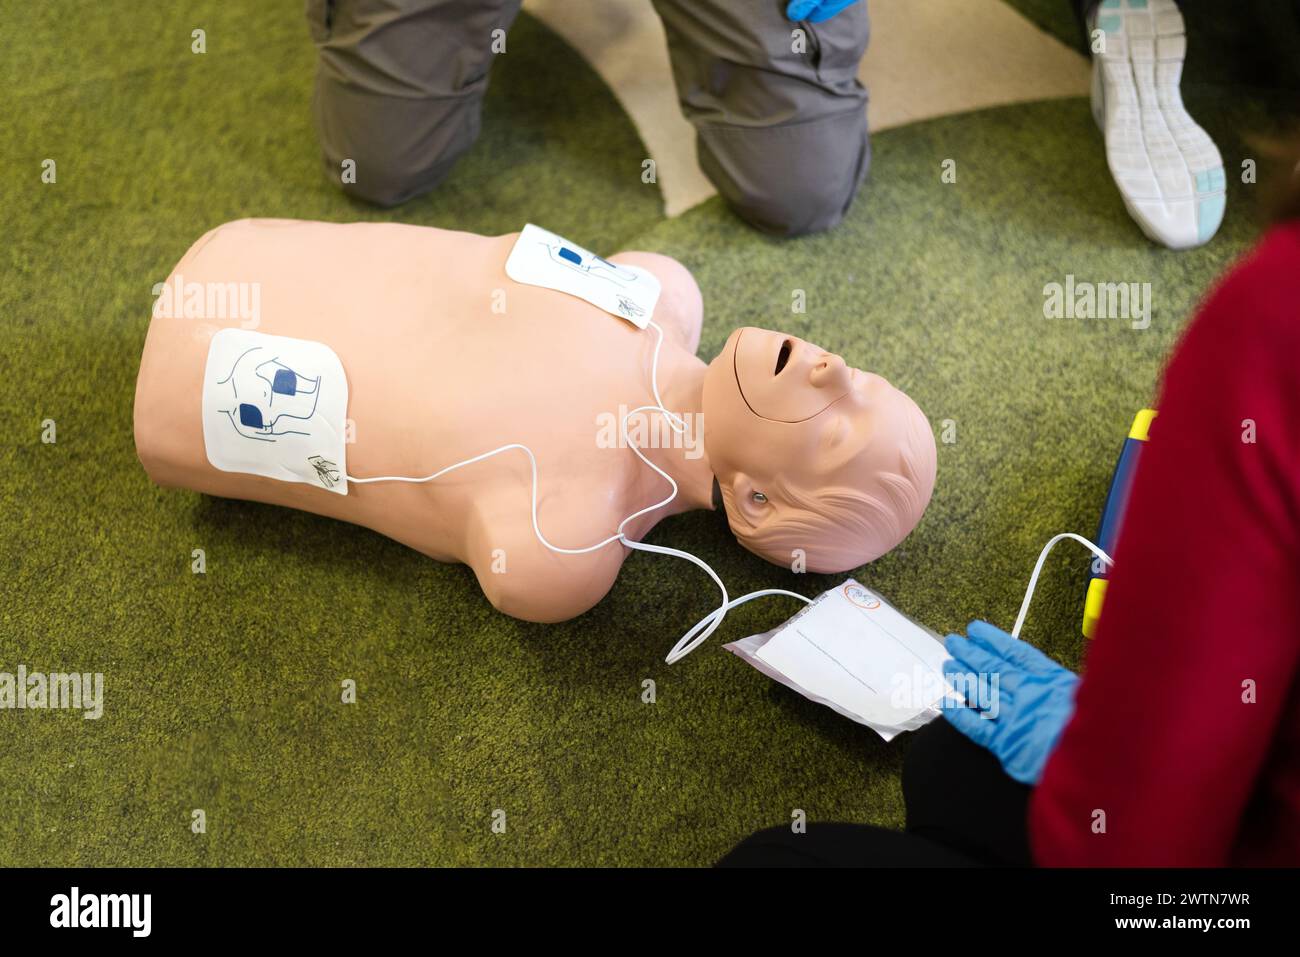 Emergency course of cardiopulmonary resuscitation using an automated external defibrillator, AED Stock Photo